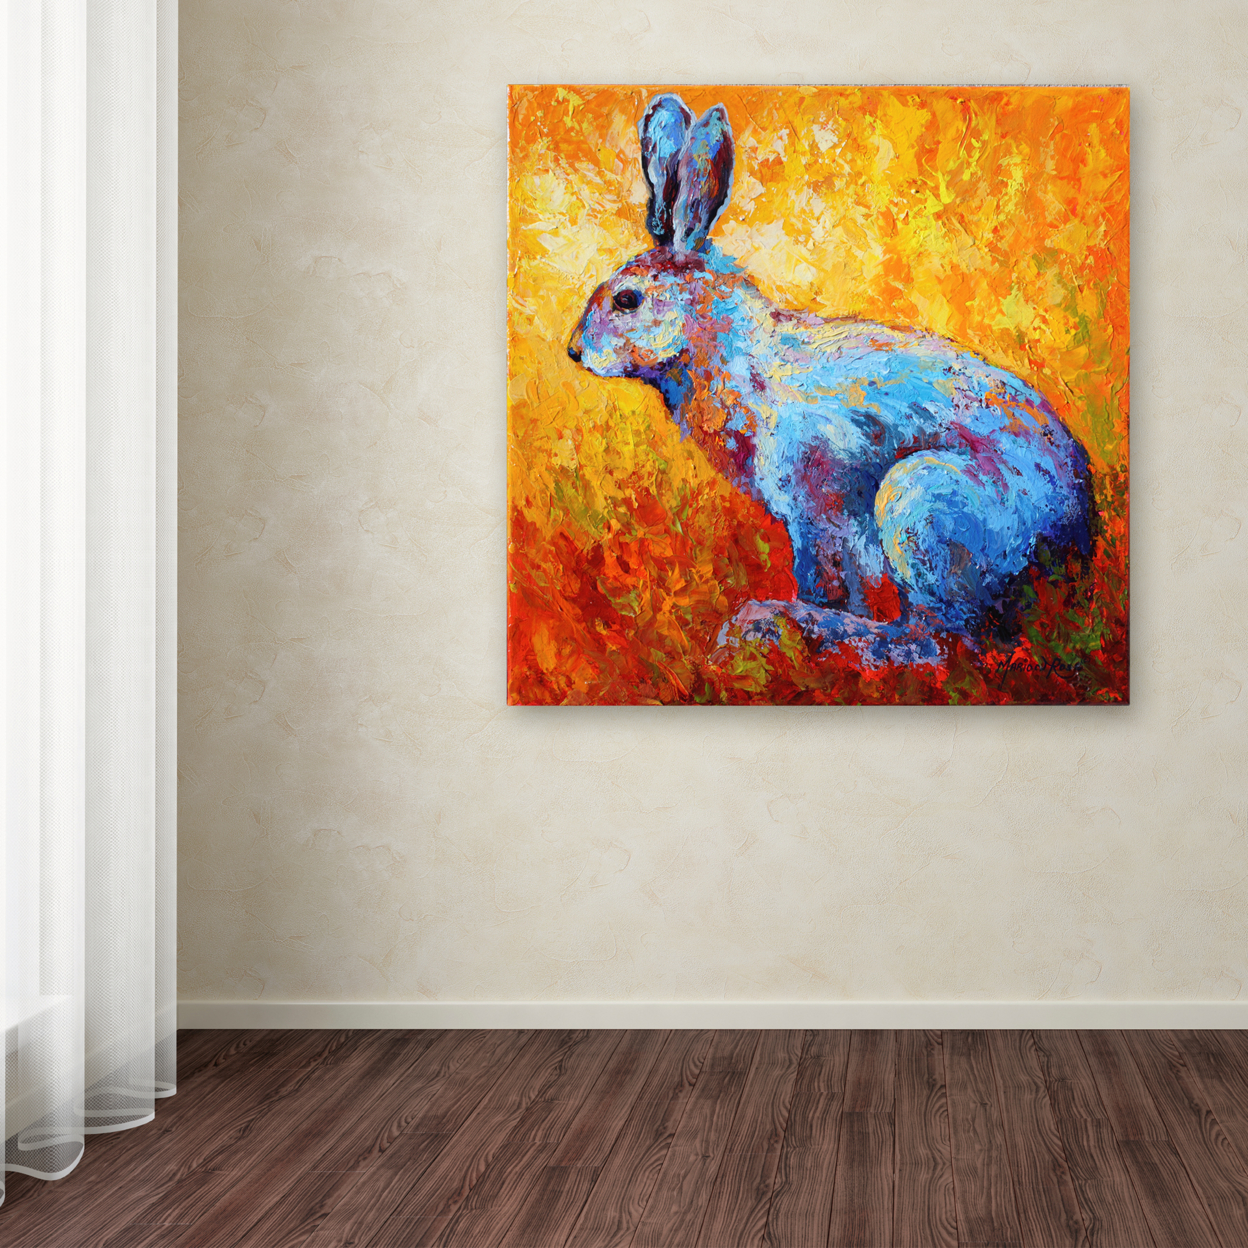 Marion Rose 'Bunnie (krabbit)' Ready To Hang Canvas Art 14 X 14 Inches Made In USA